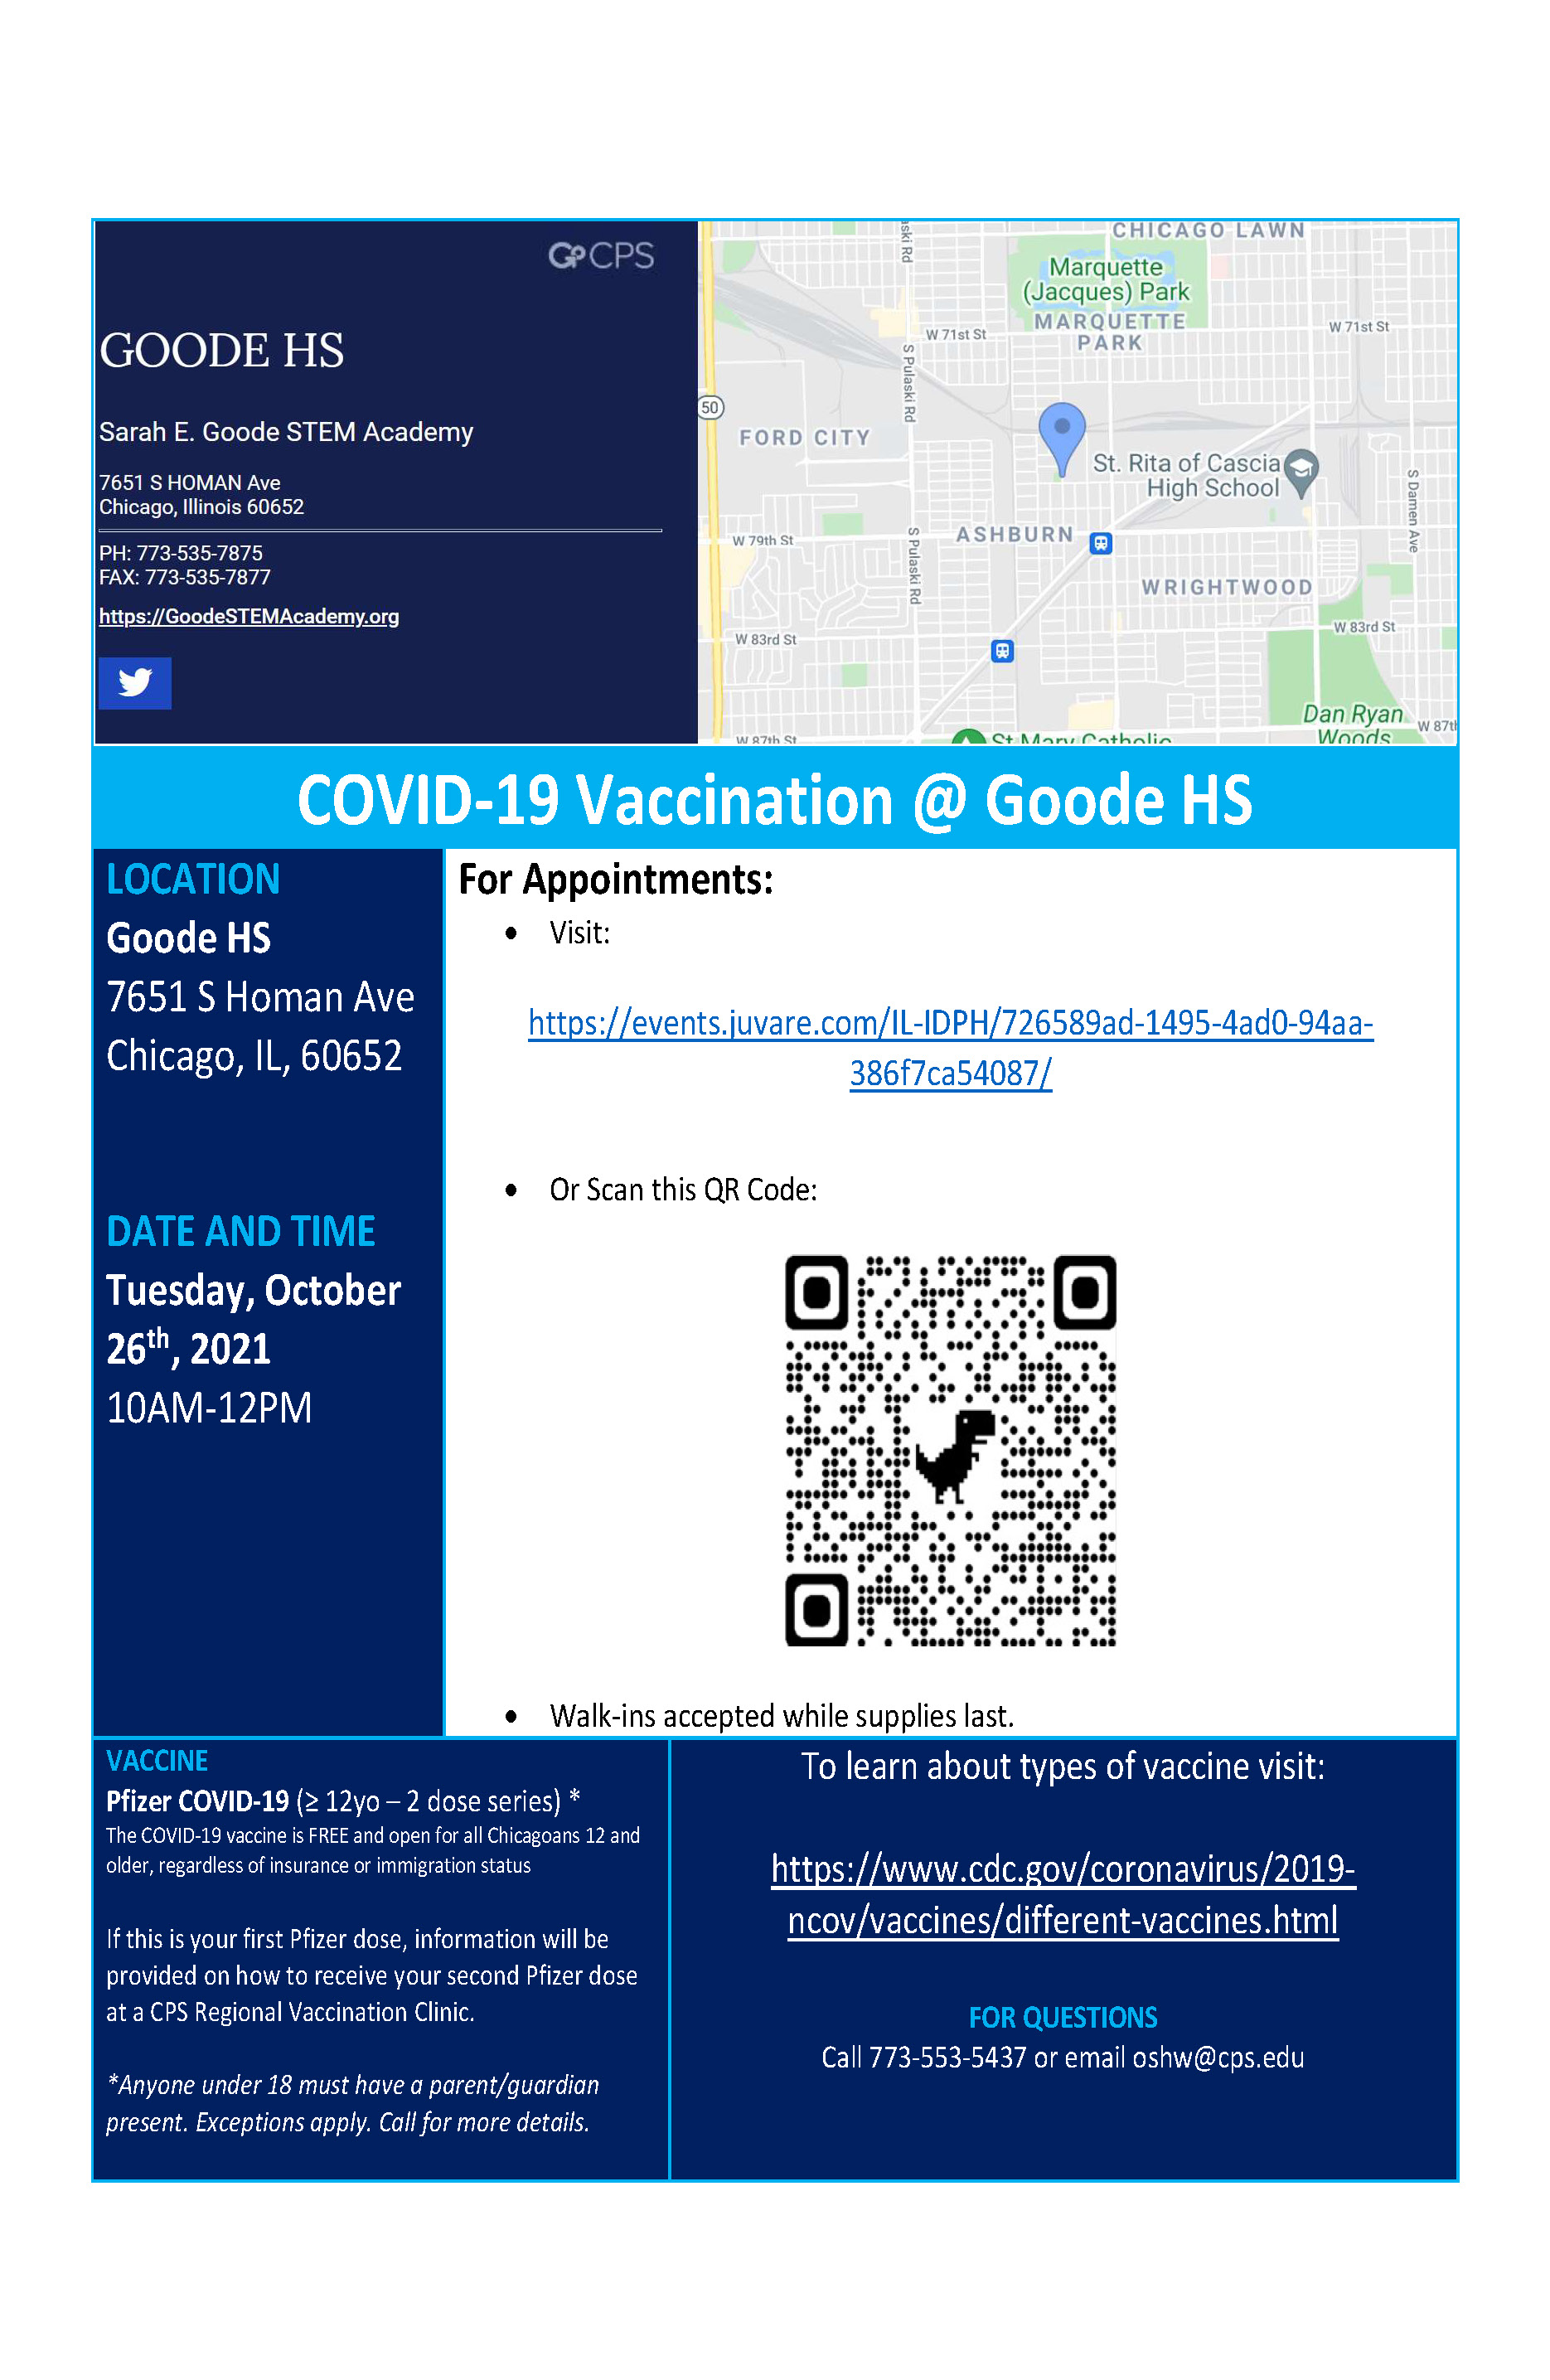 Vaccination Services for Students at Goode